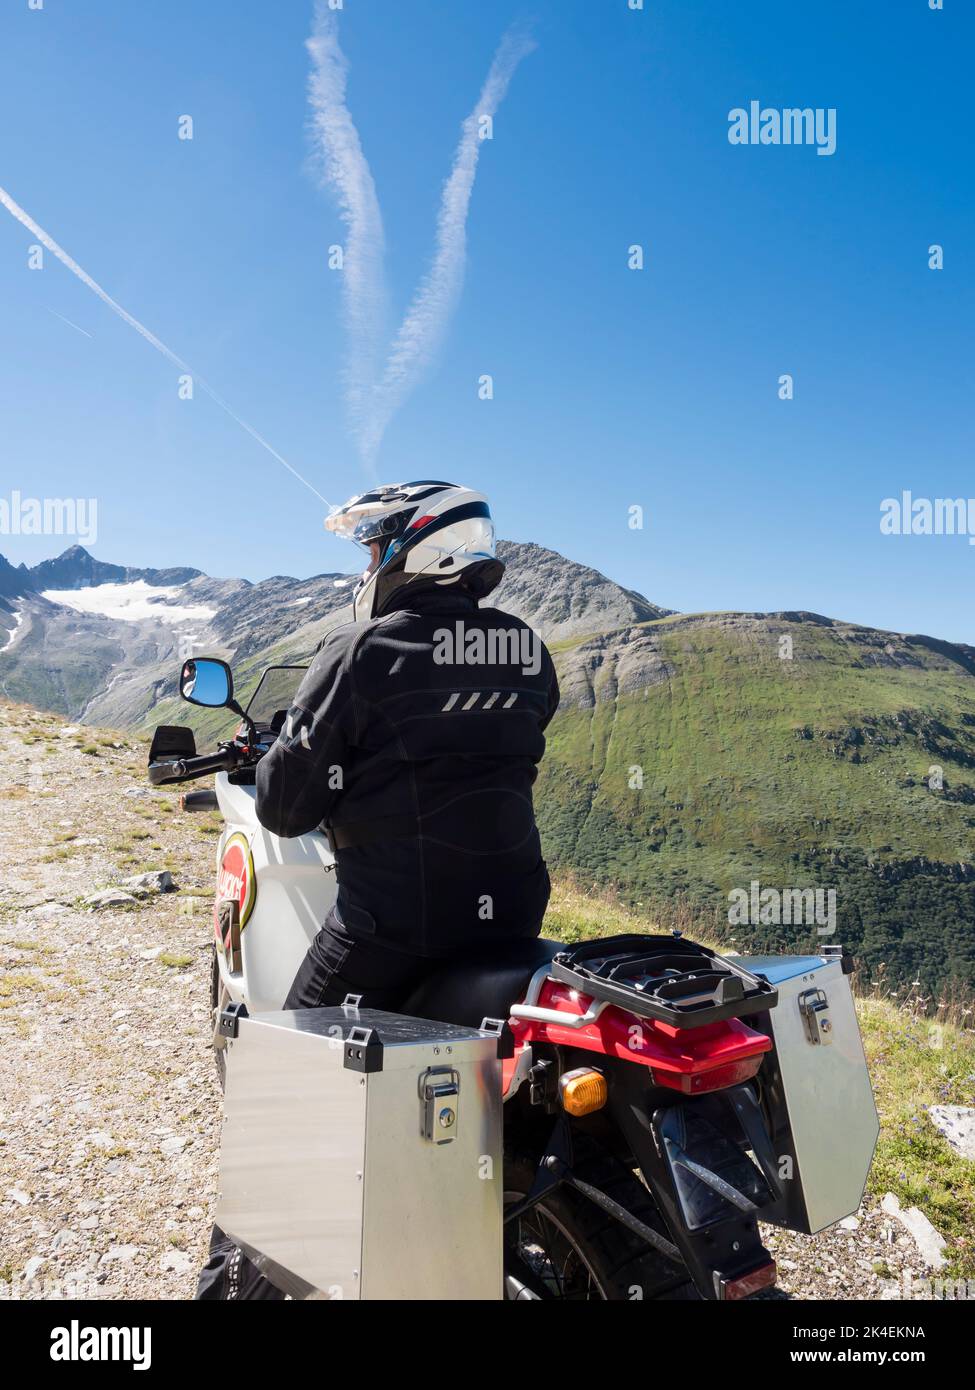 An adventure motorcycle rider at a mountain pass in the Swiss alps. Stock Photo